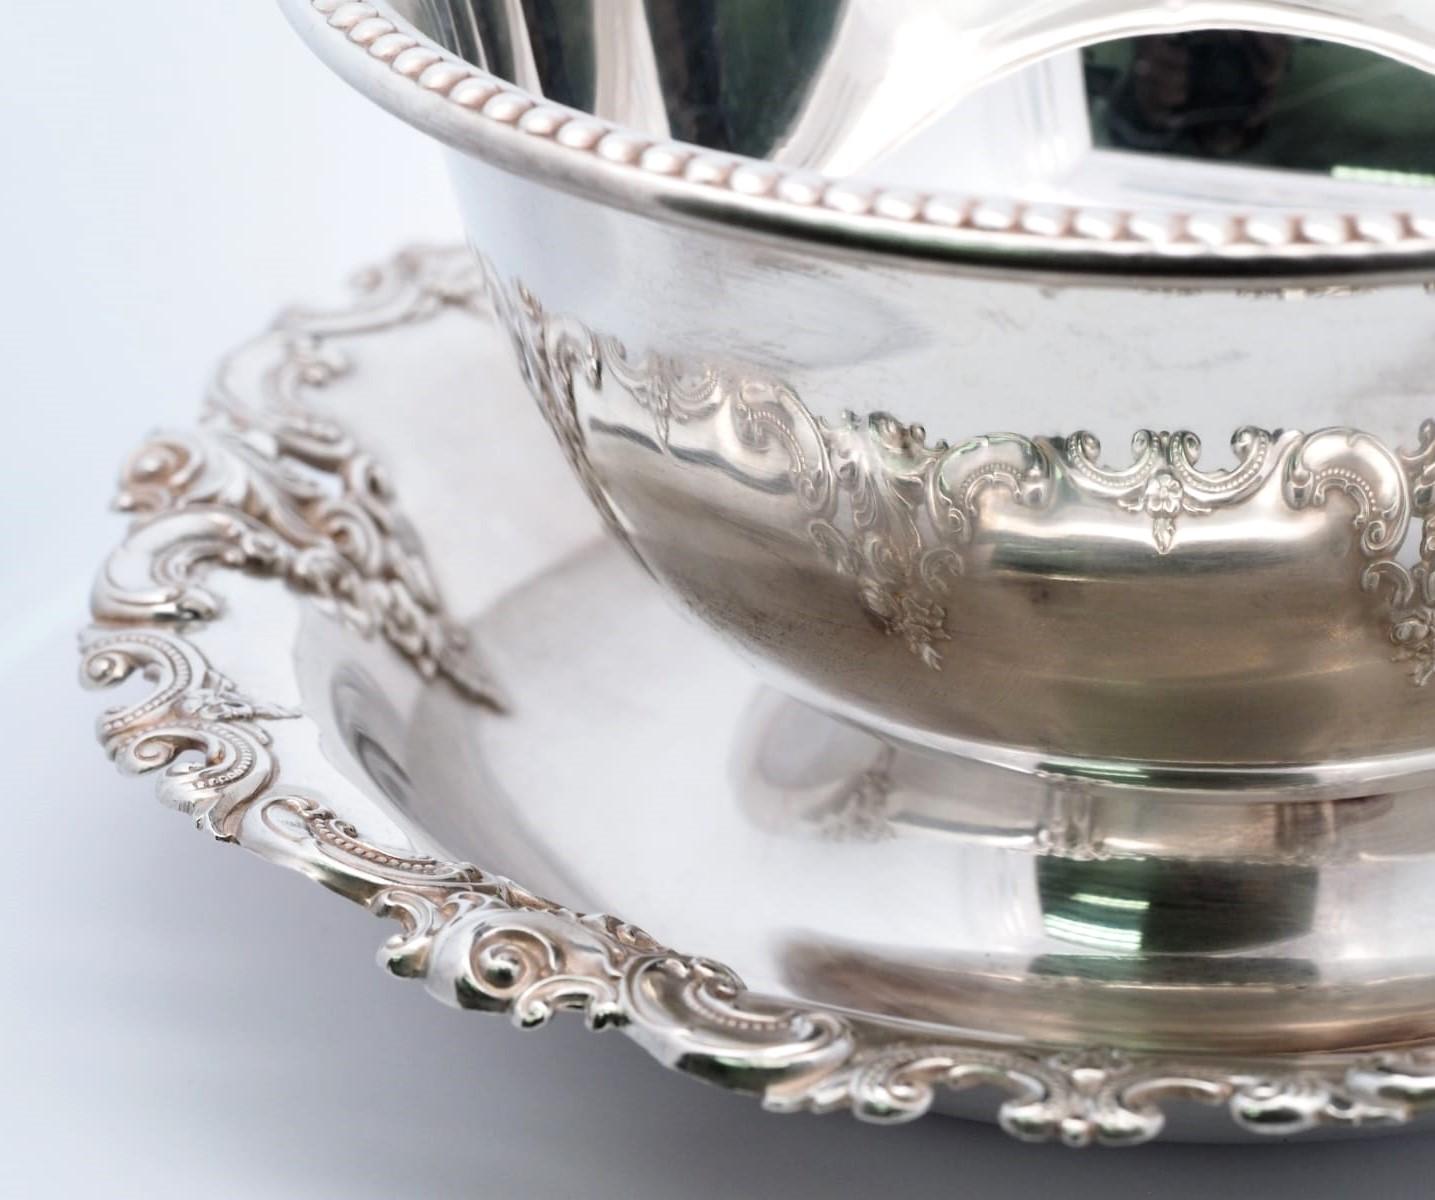 Beautiful Grande baroque by Wallace sterling silver gravy boat marked #4995.
This gravy boat measures 3 x 6 in diameter and weighs 7.5 ounces (214.6 grams). 
It is not monogrammed and is in very good condition. Wonderful!

Dimensions:
Height: 3 in